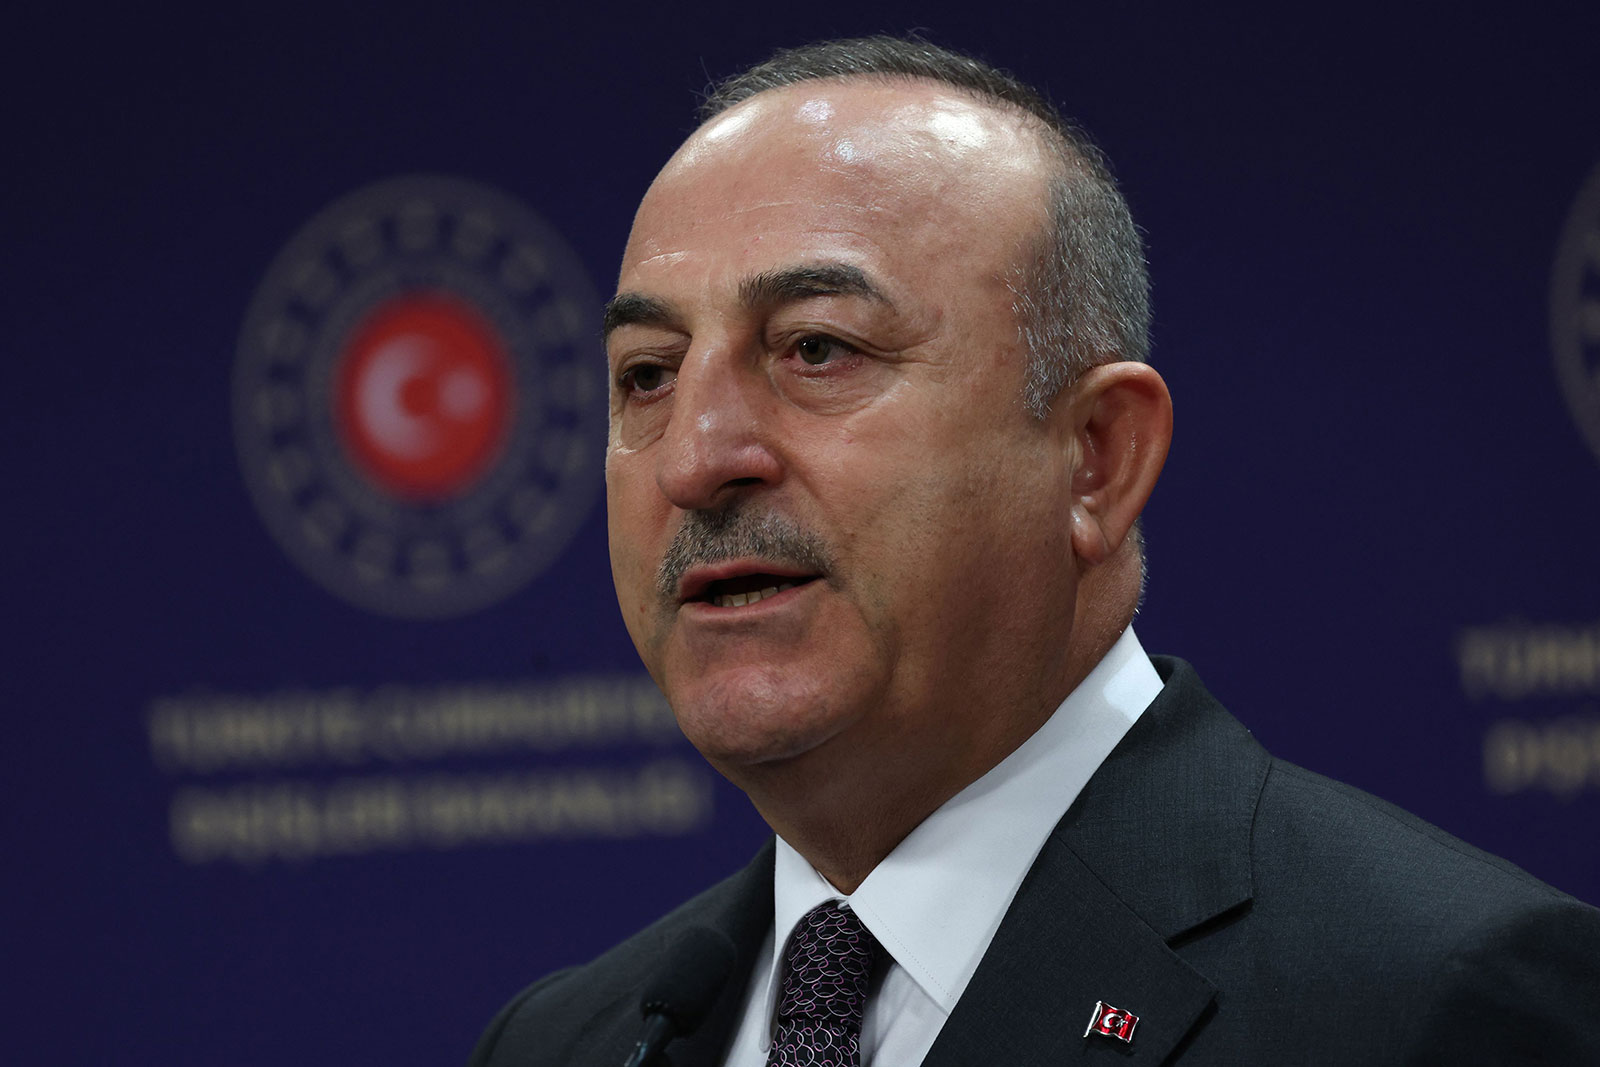 Turkish Foreign Minister Mevlut Cavusoglu speaks during a press conference held with his Hungarian counterpart after their meeting in Ankara, Turkey, on February 27.